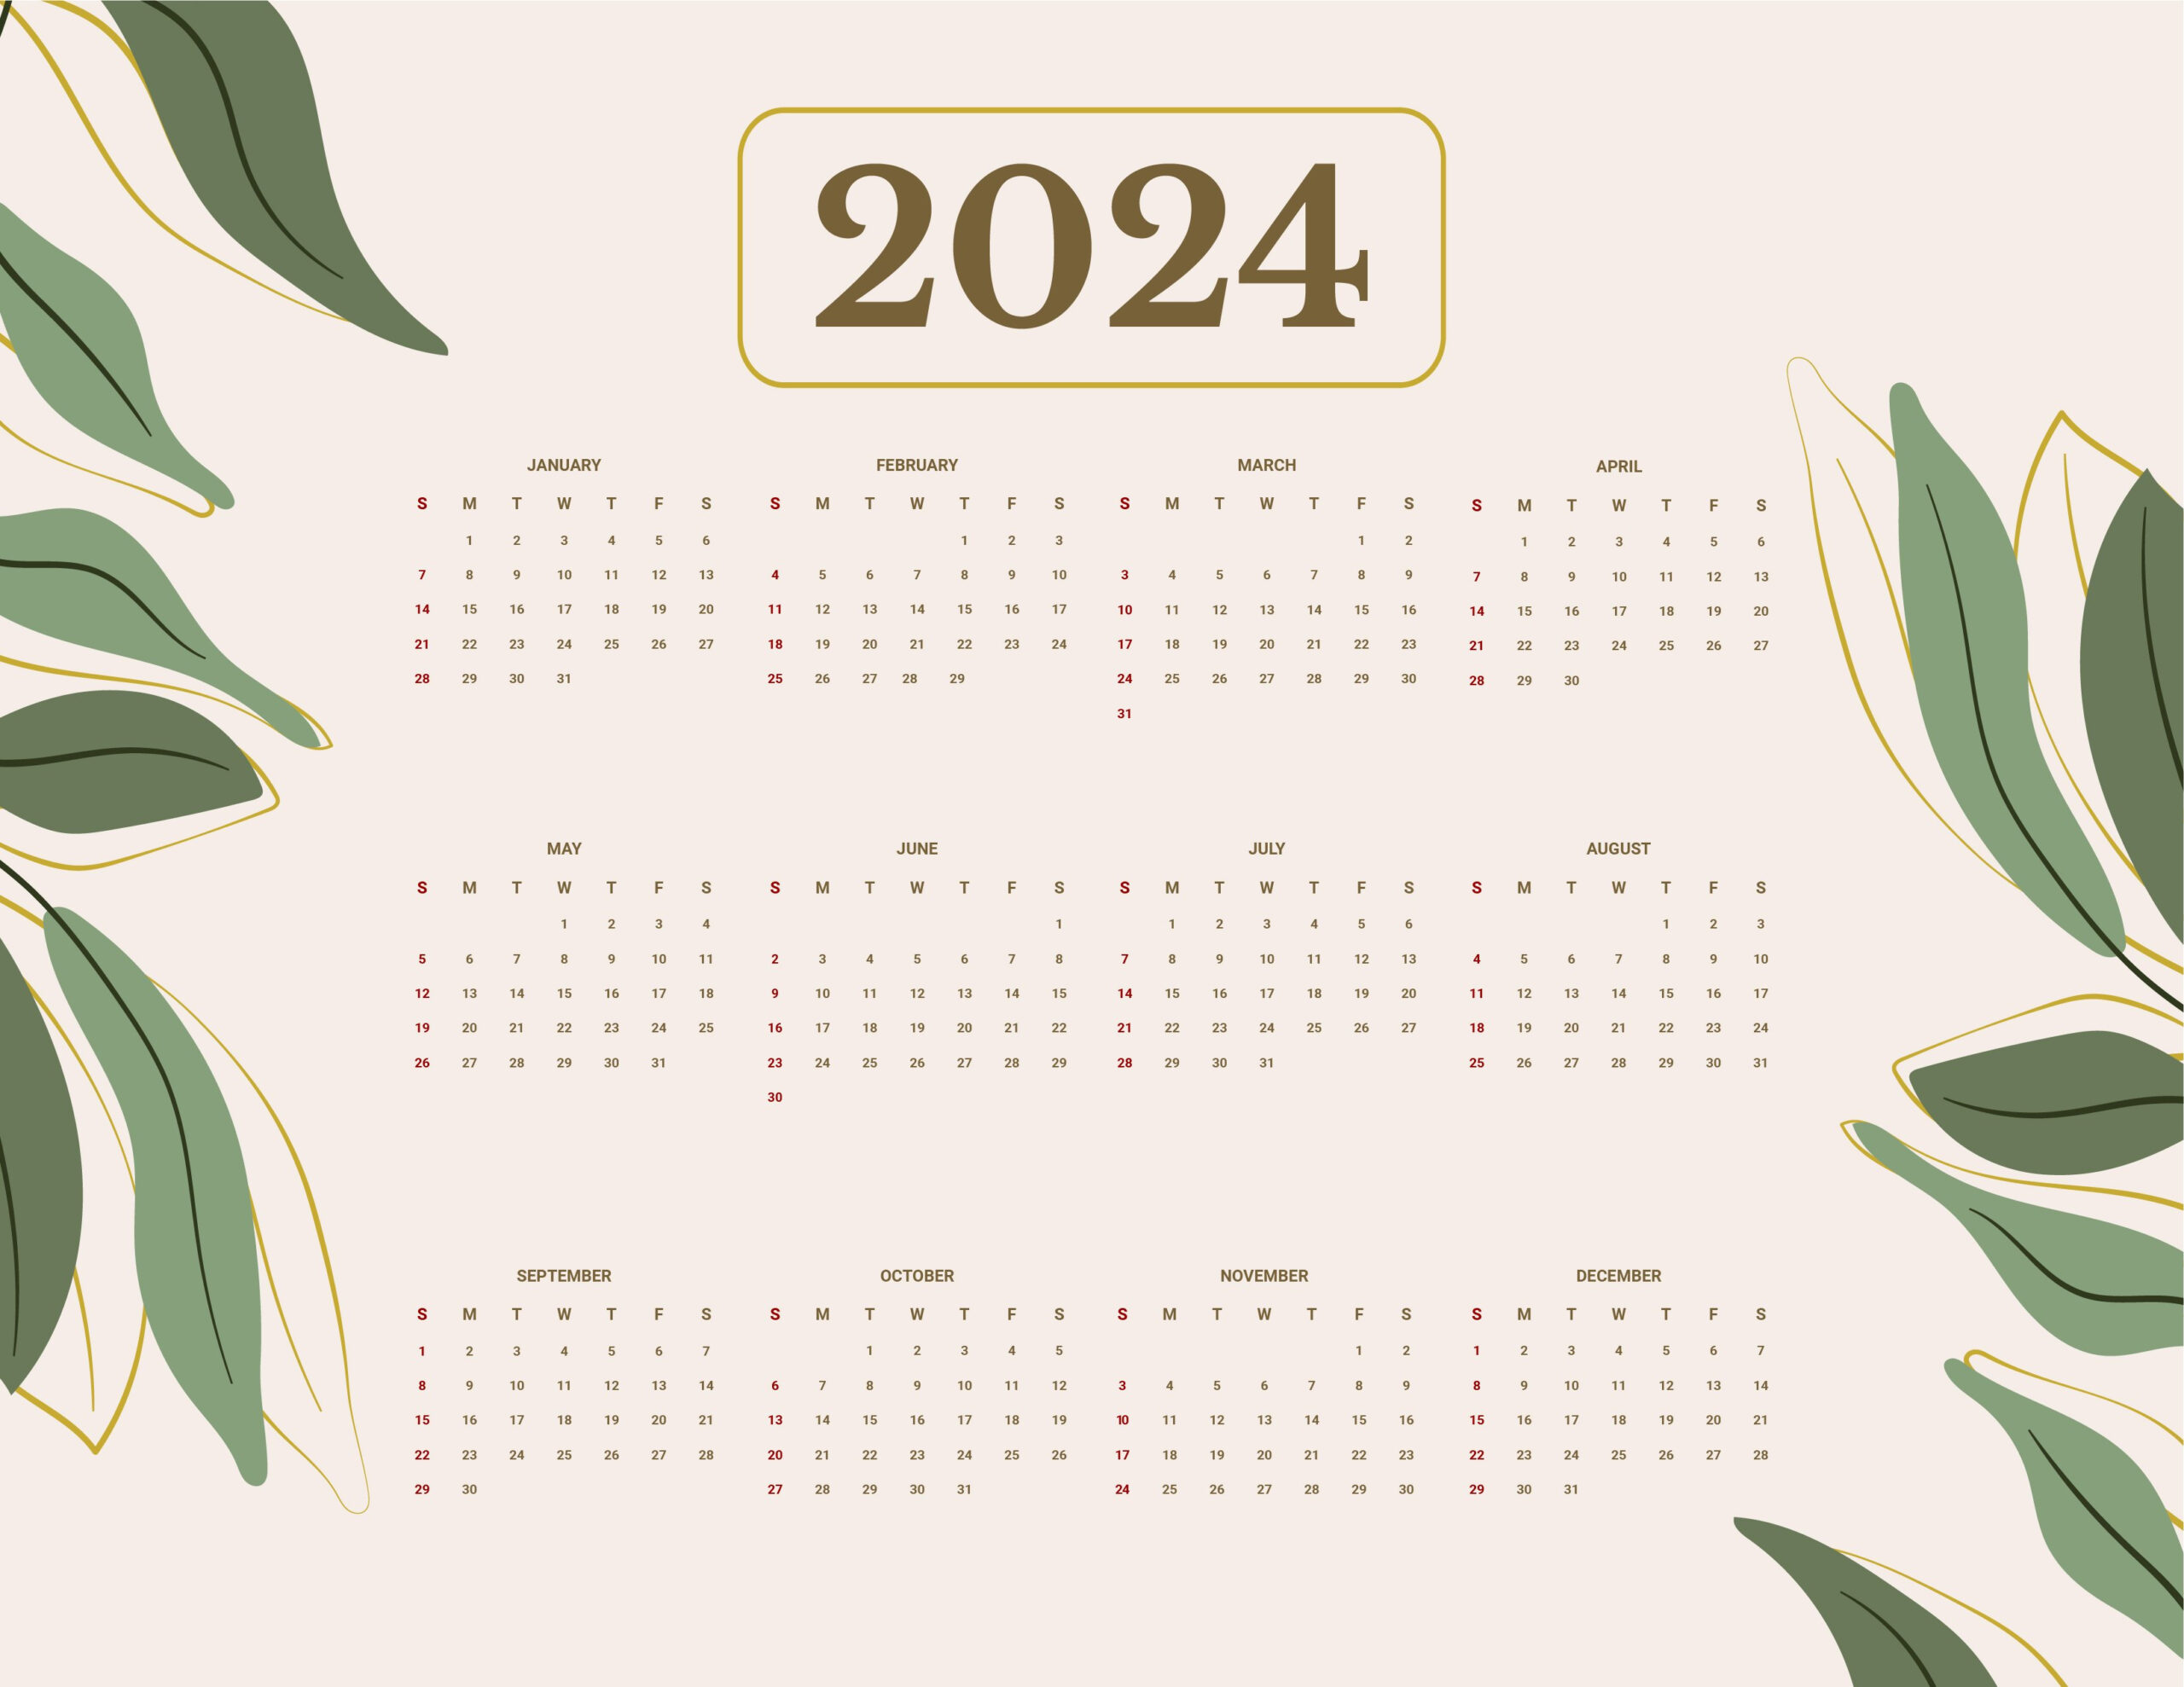 Free 2024 Calendar Template - Download In Word, Google Docs, Excel | 2024 Yearly Calendar In Word